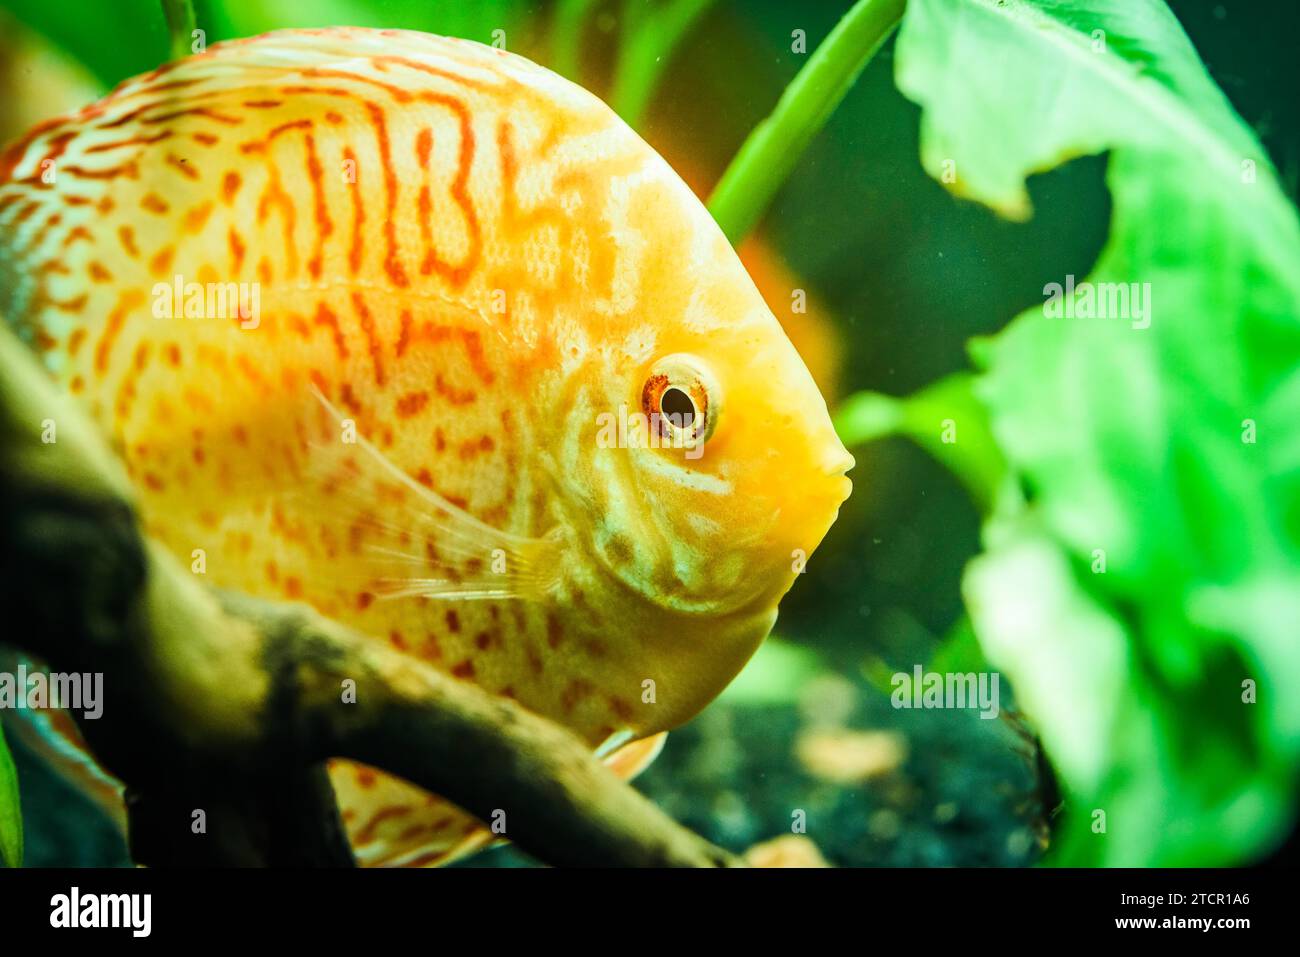 Colorful fish from the spieces discus (Symphysodon) in aquarium. Selective focus Stock Photo